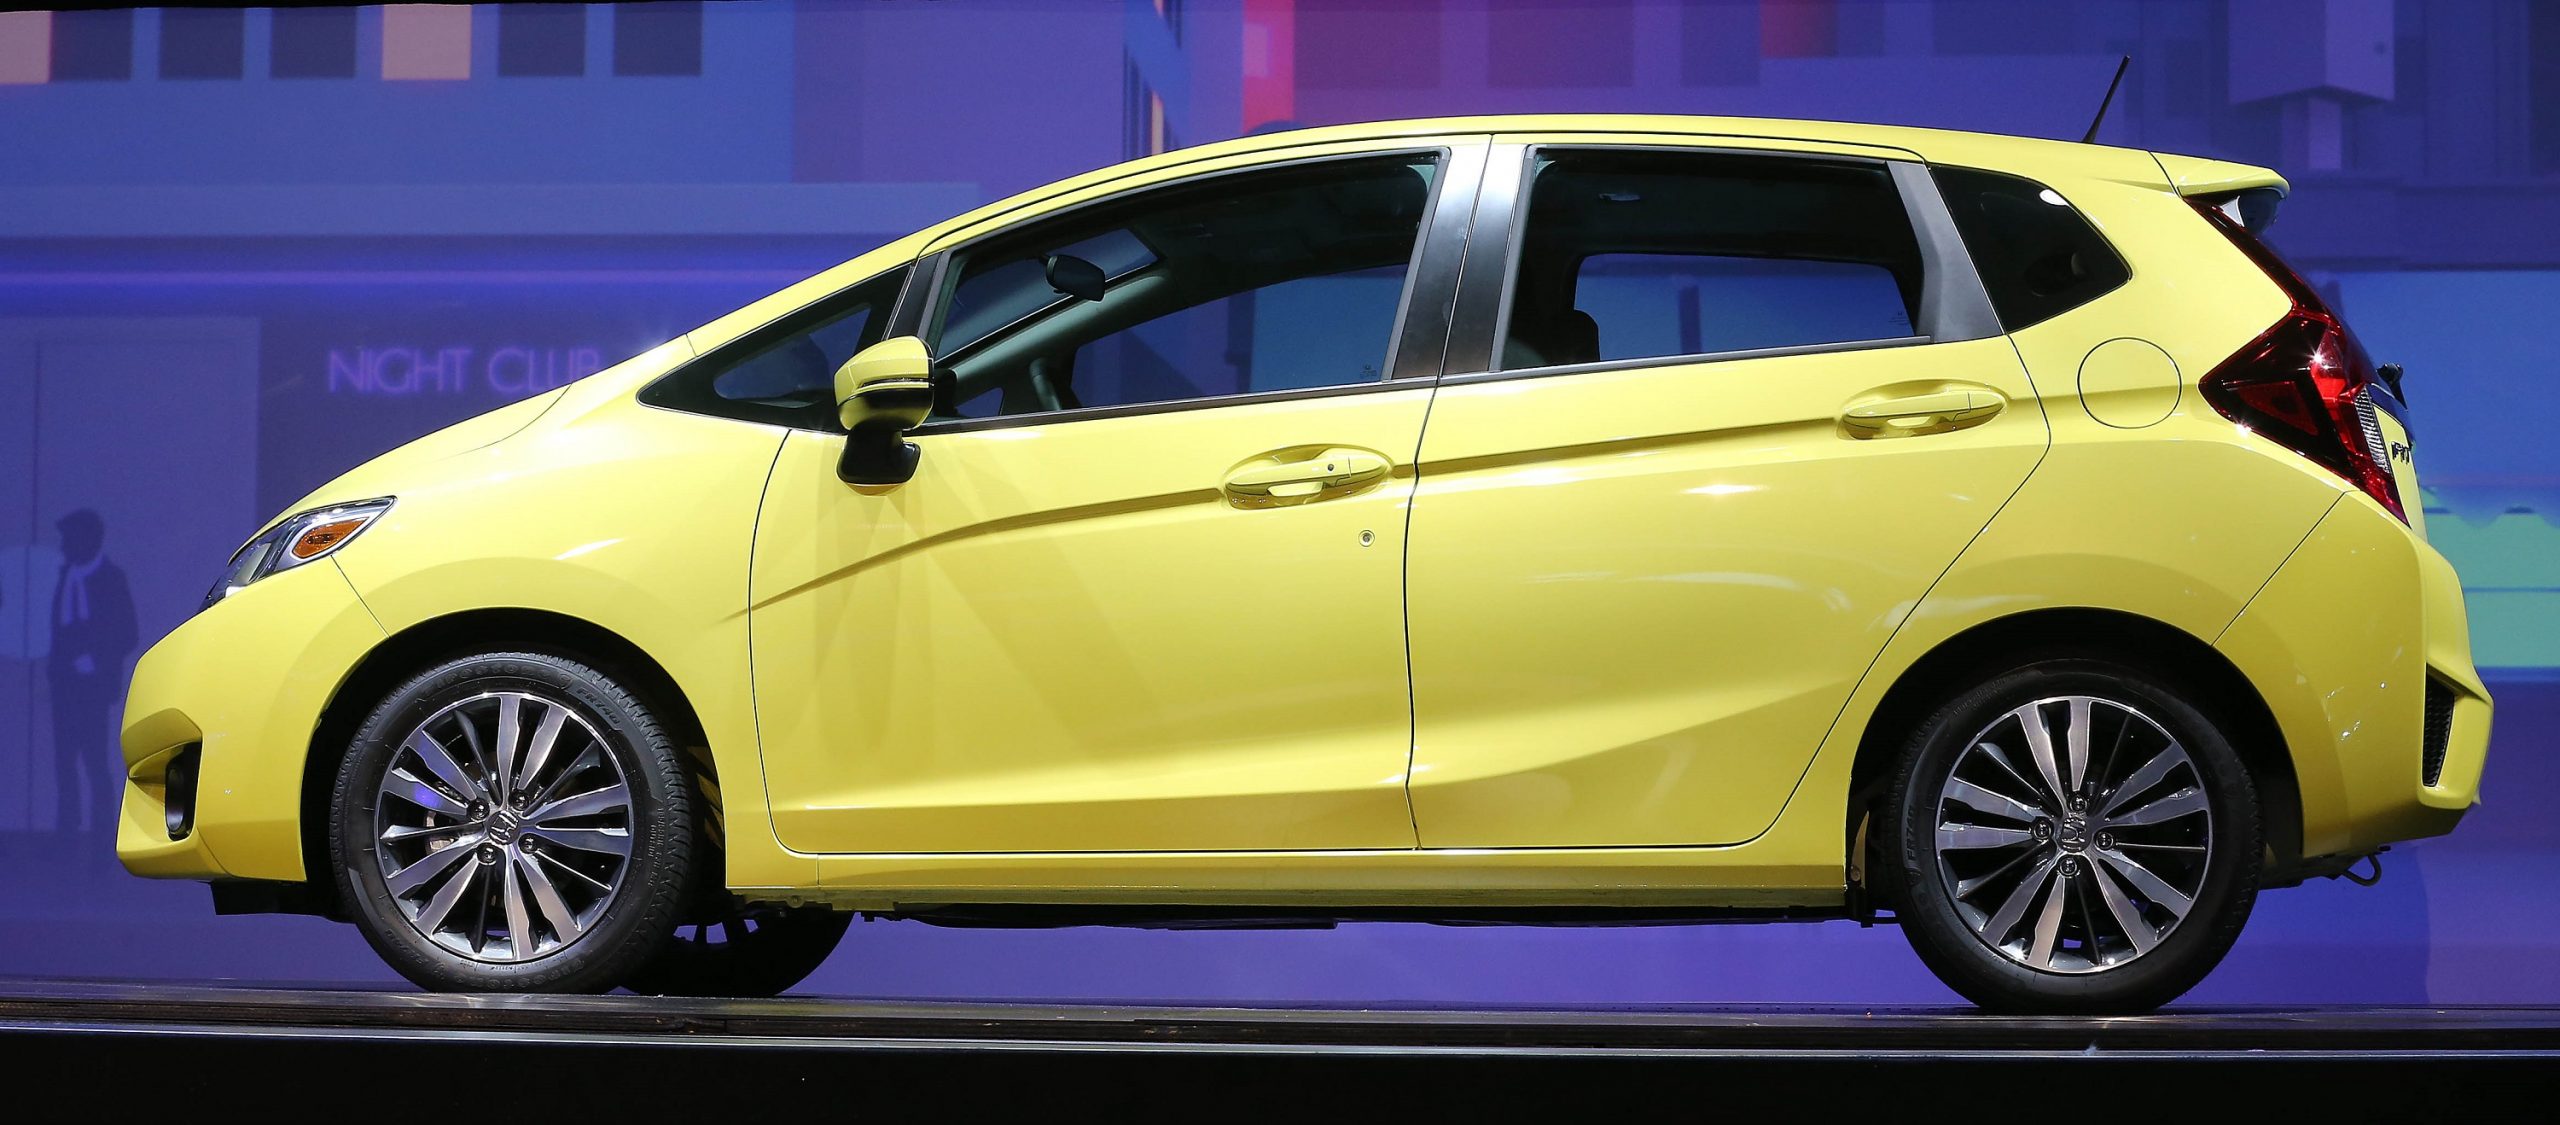 A yellow 2015 Honda Fit subcompact car shot in profile at an auto show